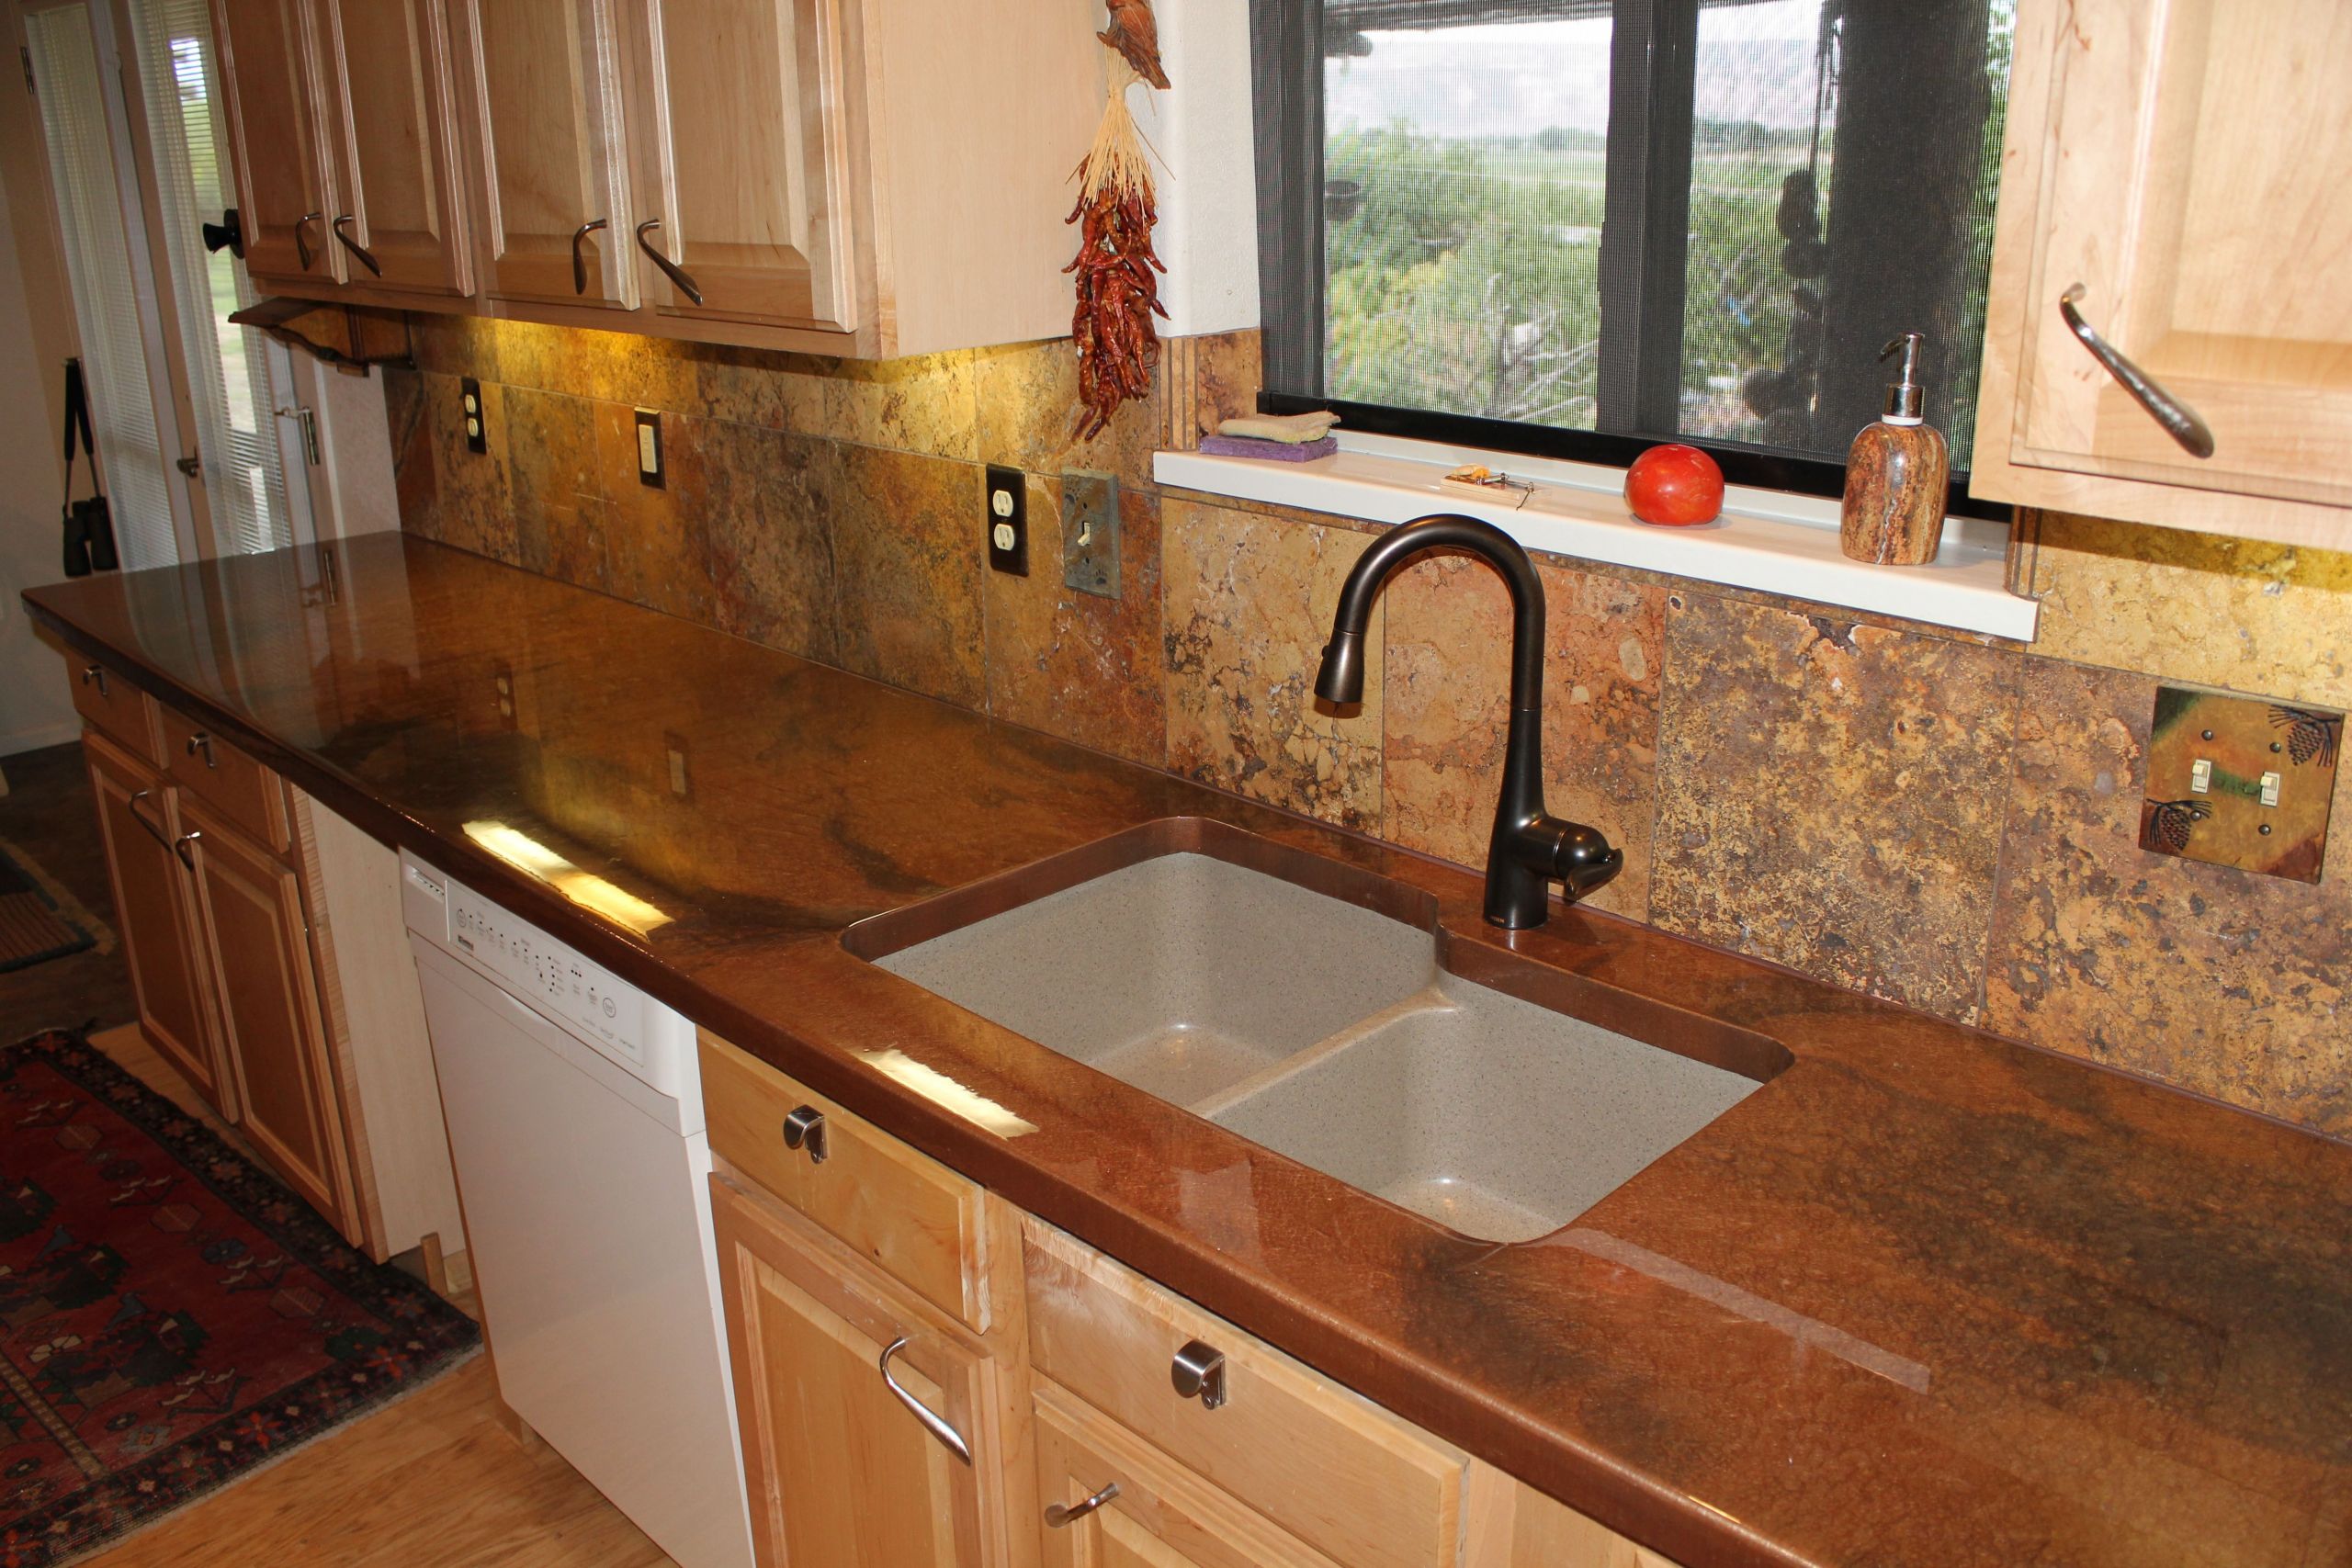 Epoxy Kitchen Countertops
 Copper with Metallic Brown Accents countertopepoxy